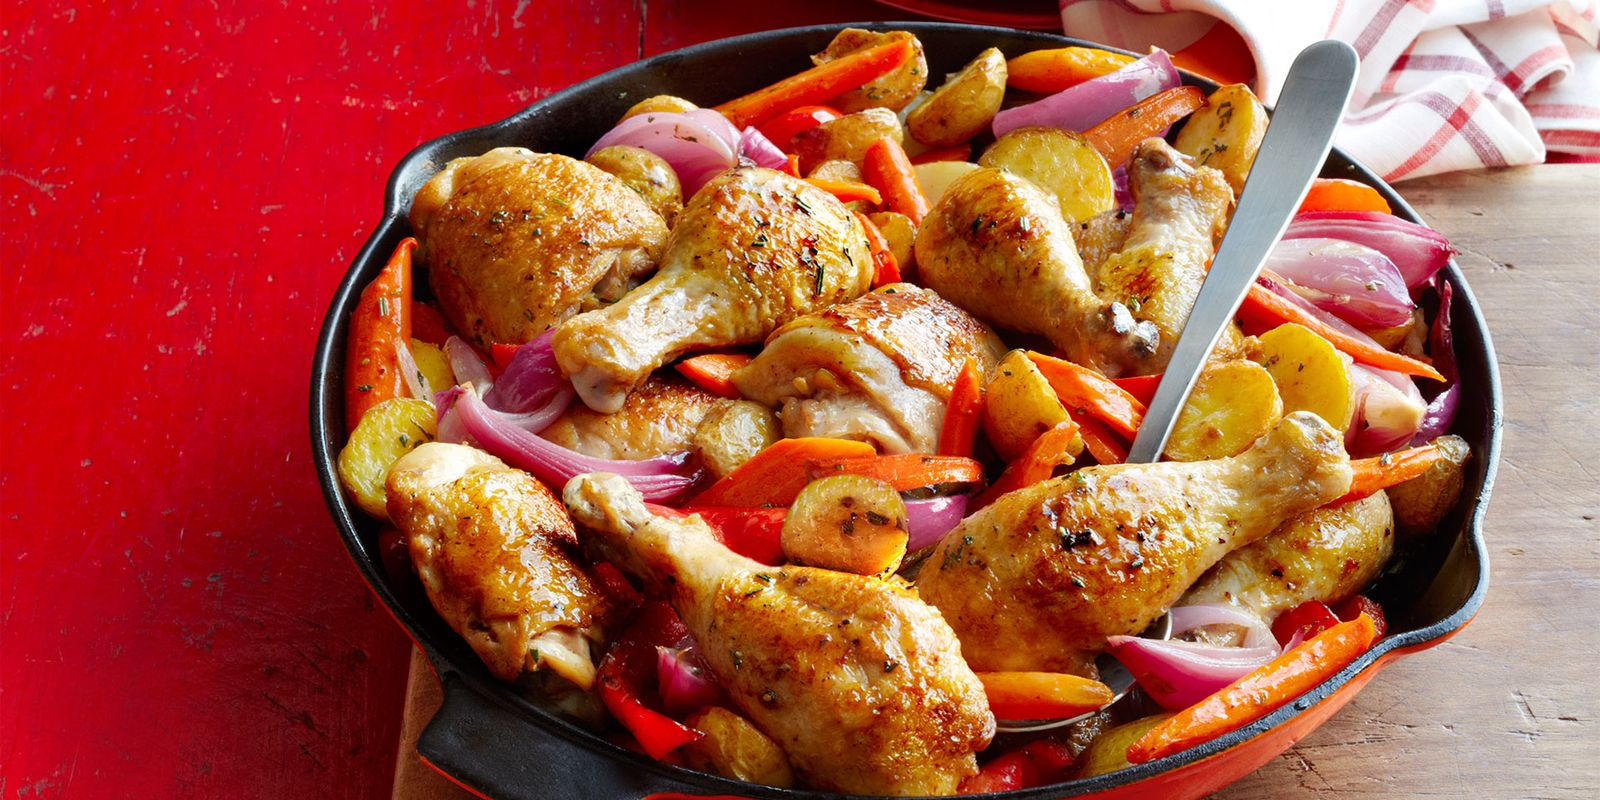 Skillet Chicken with Roasted Potatoes and Carrots